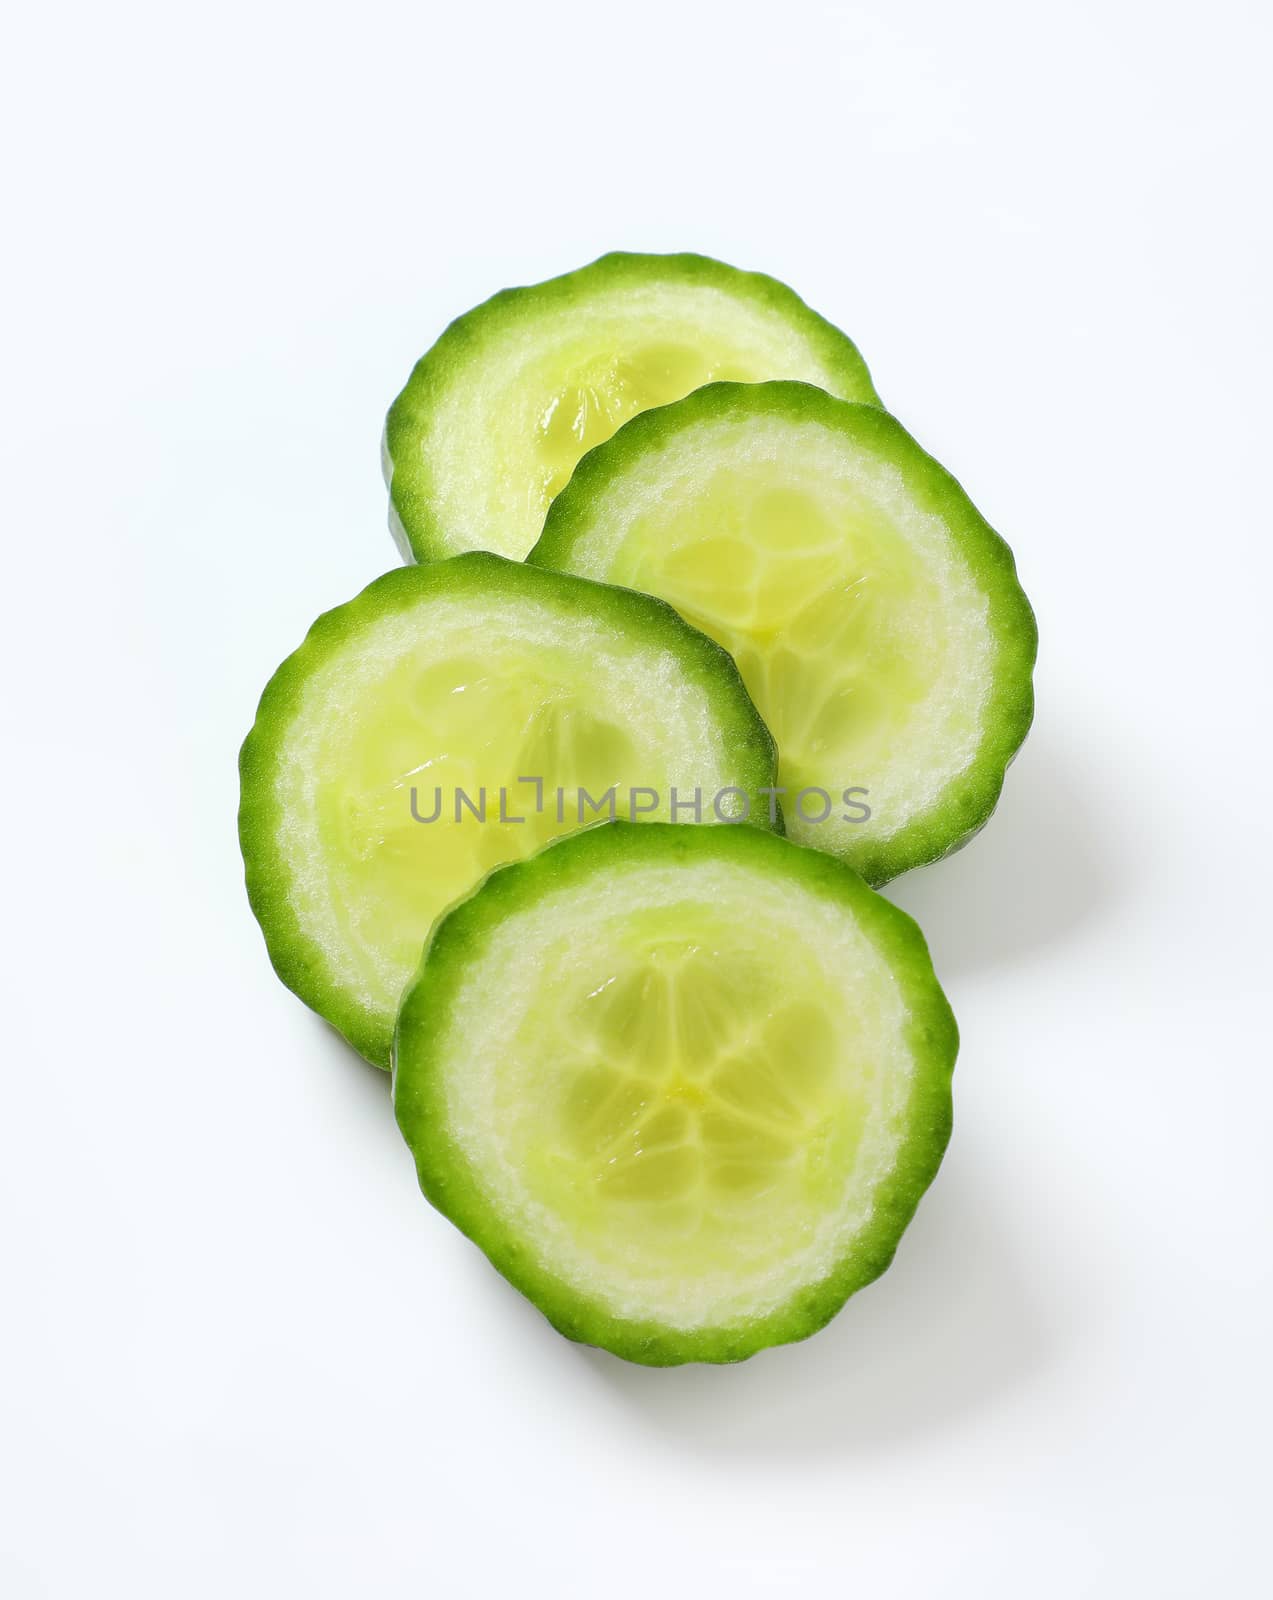 slices of green cucumber by Digifoodstock